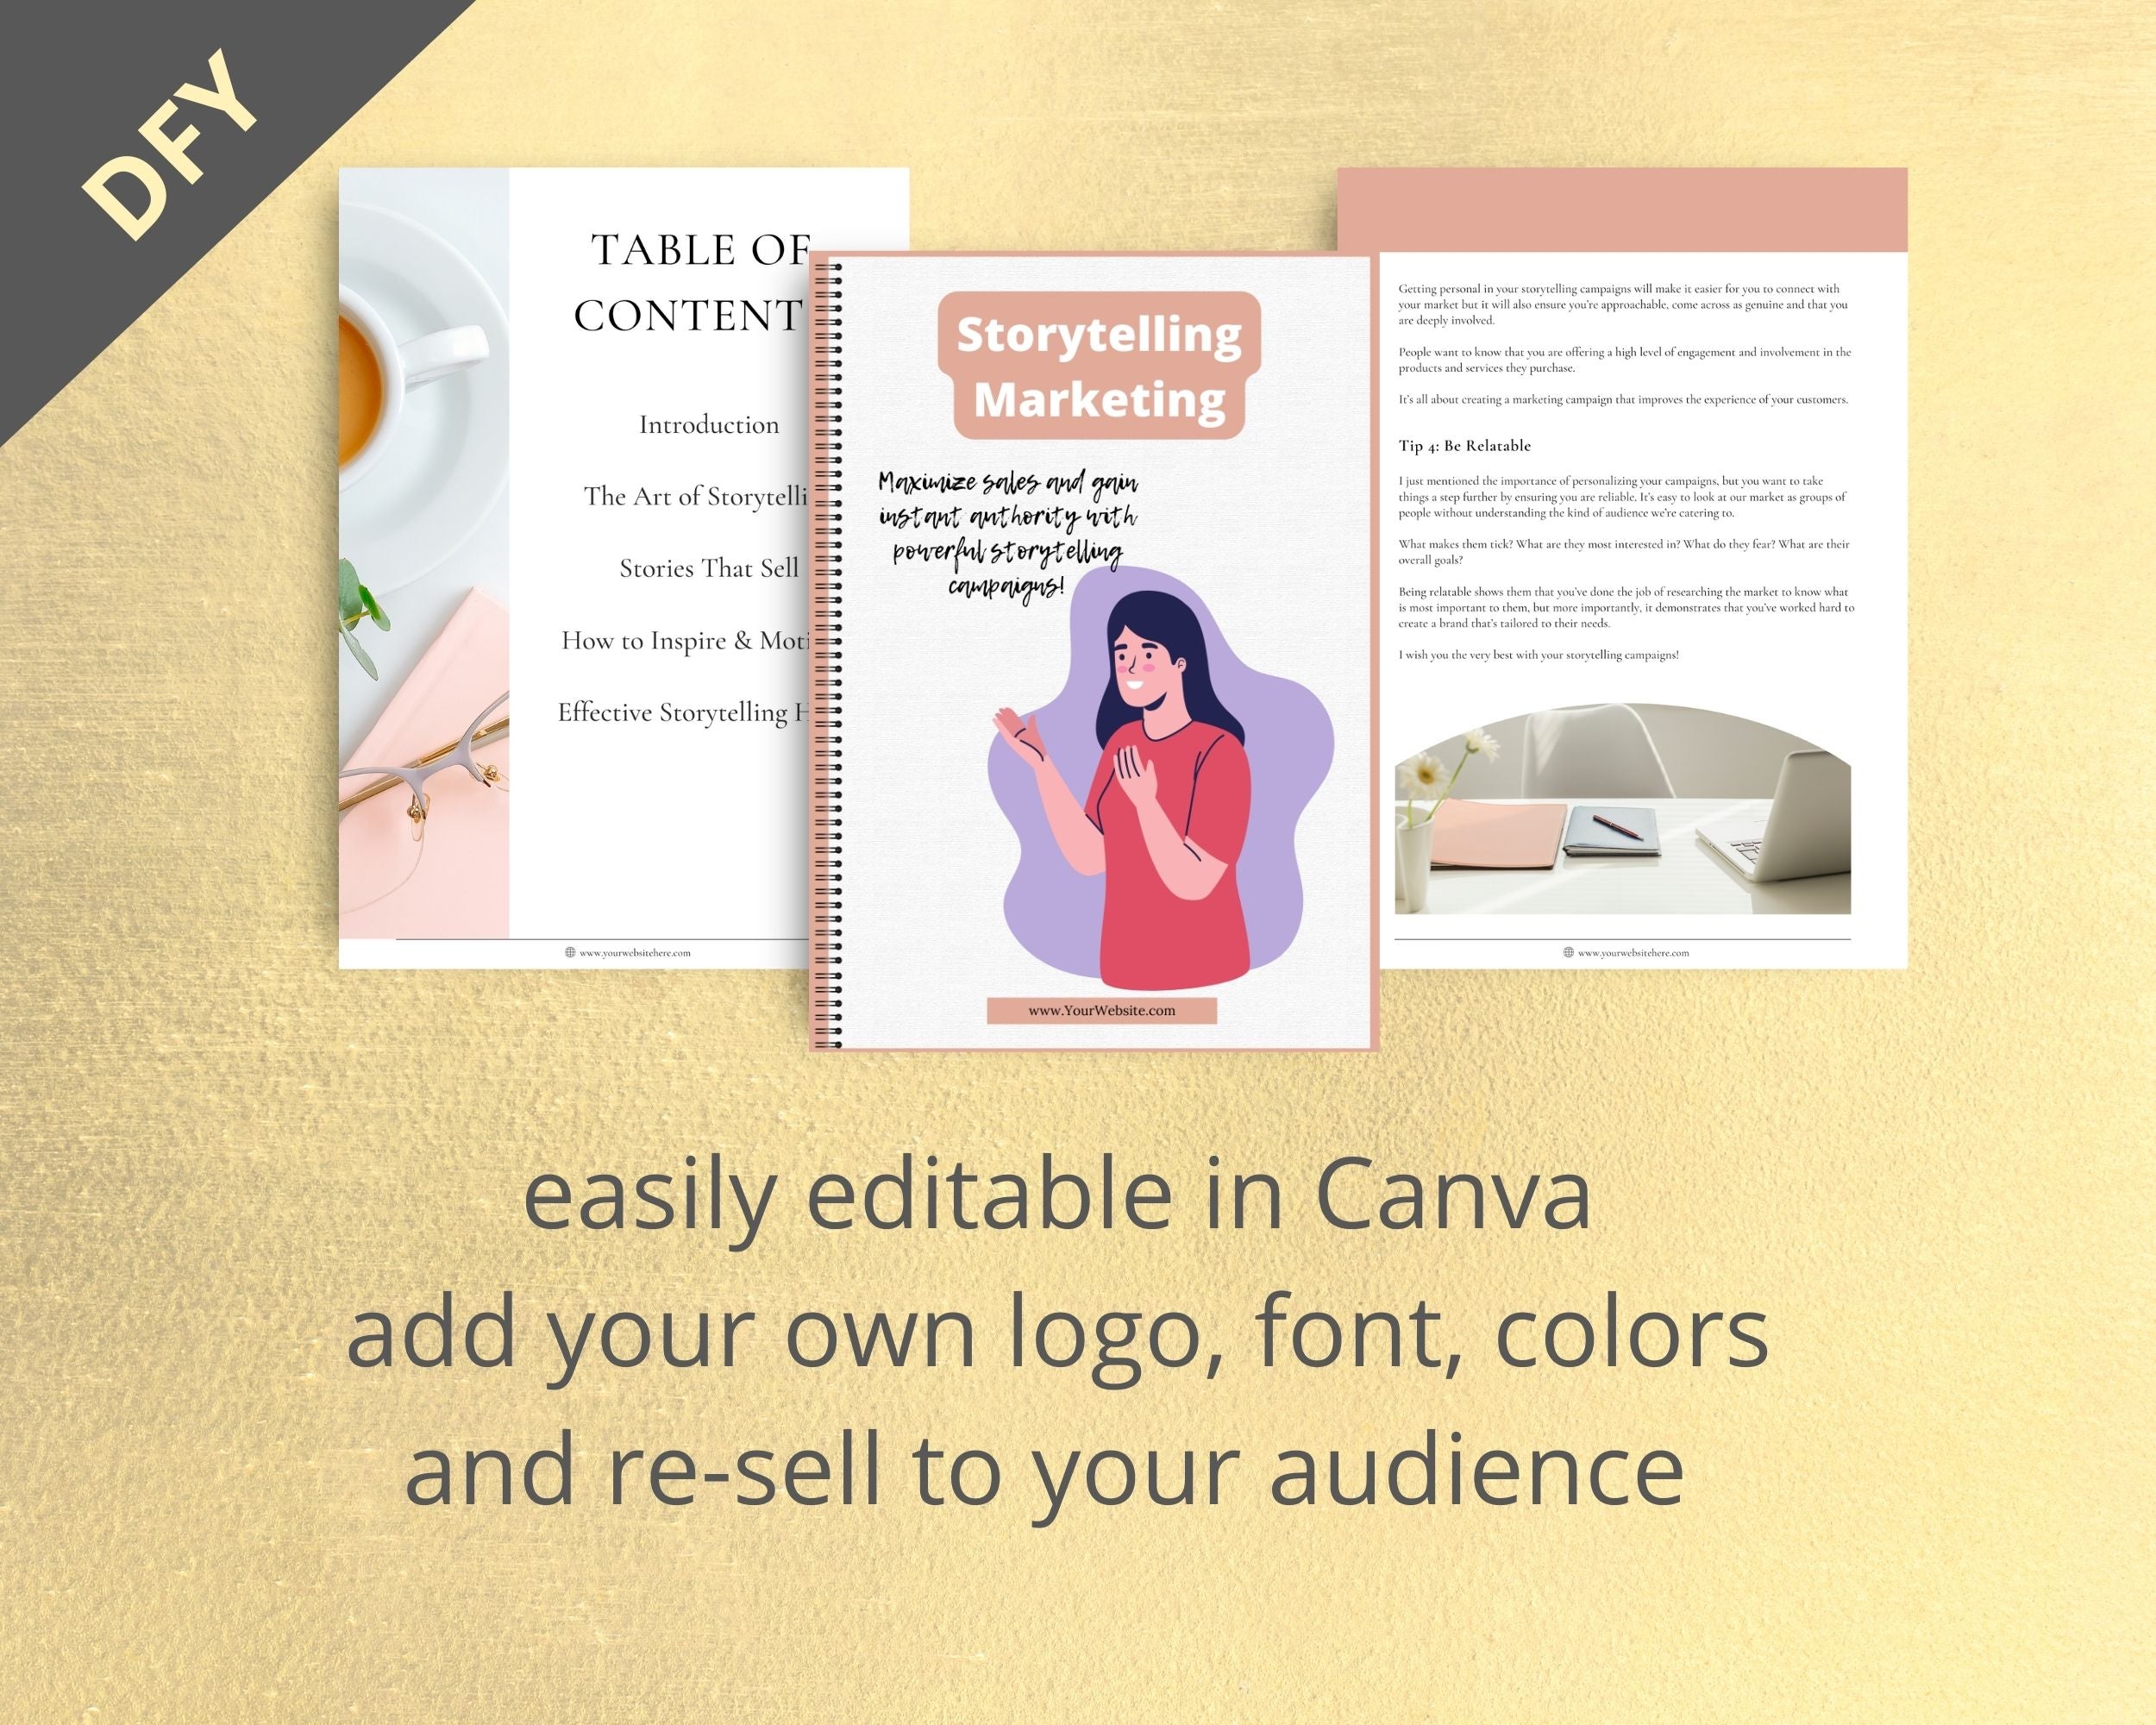 Editable Storytelling Marketing Ebook | Done-for-You Ebook in Canva | Rebrandable and Resizable Canva Template